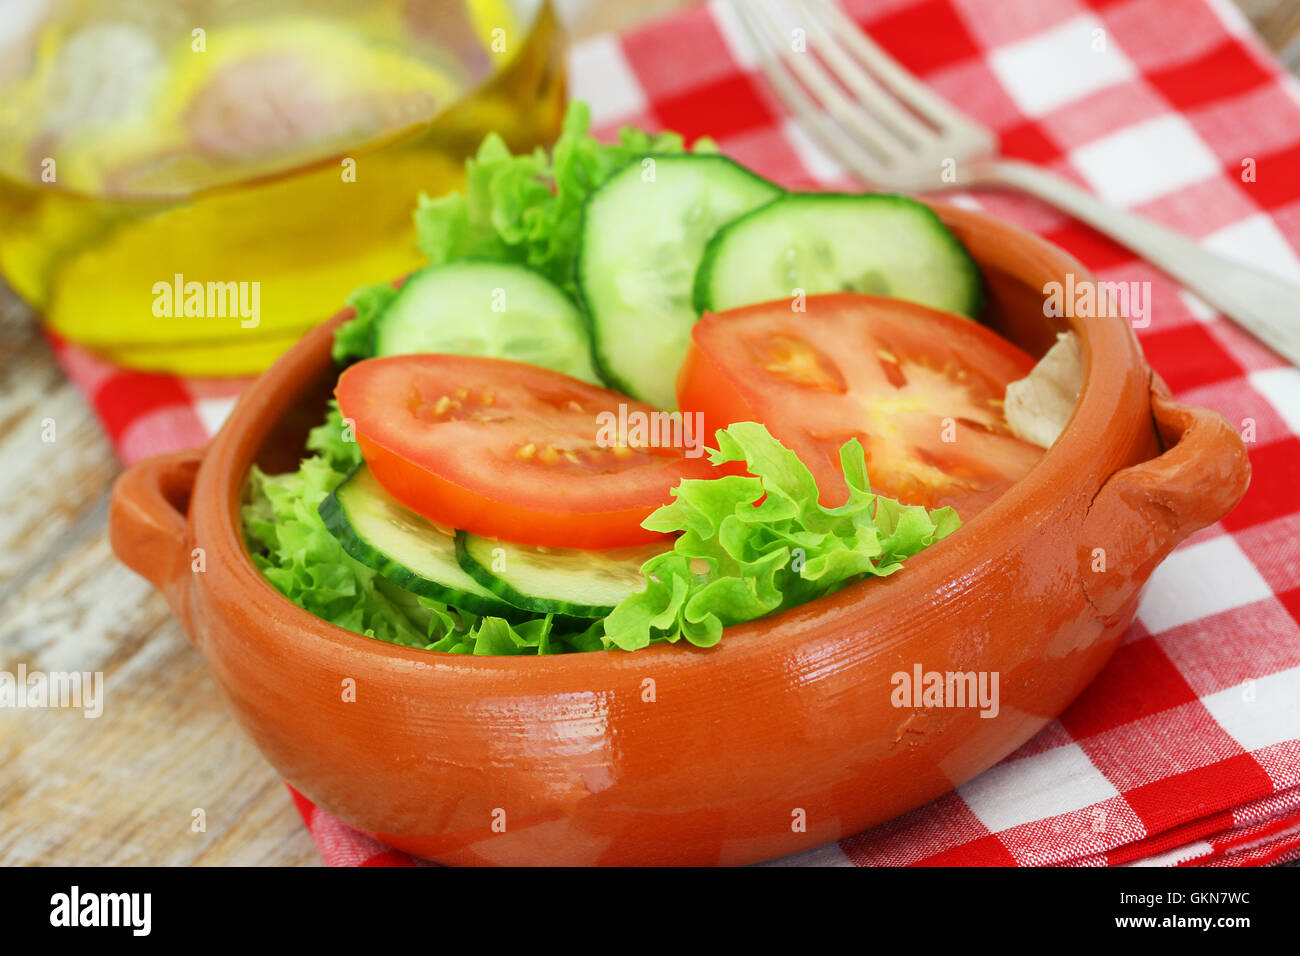 Fresh green salad consisting of lettuce, tomatoes and cucumbers in clay bowl on checkered cloth Stock Photo